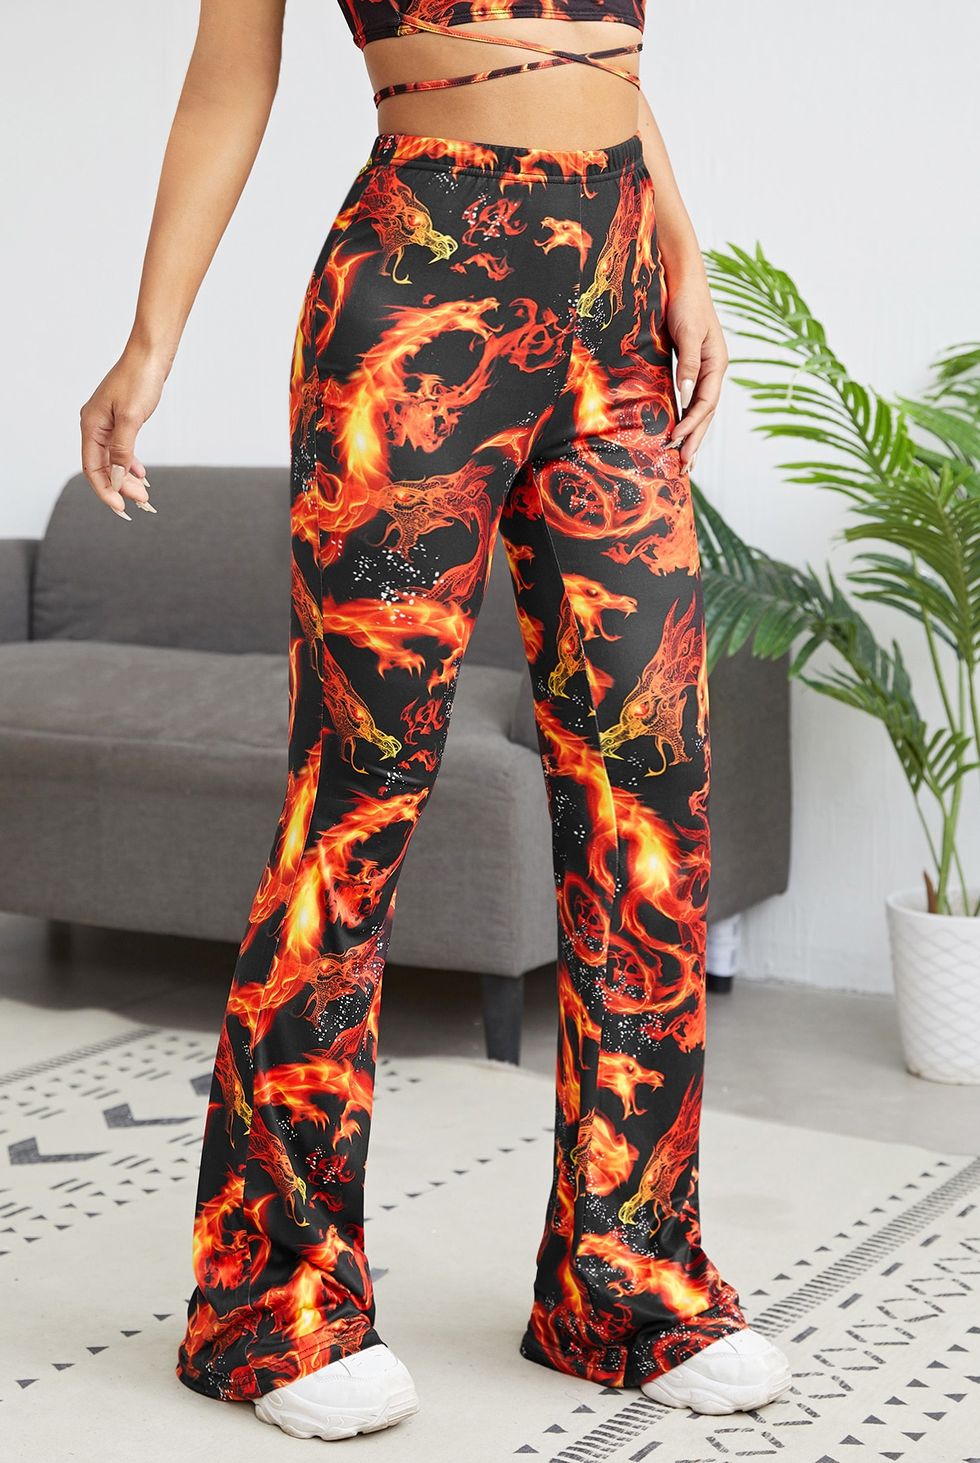 Demi Lovato’s Flame Pants Are Giving Flavortown